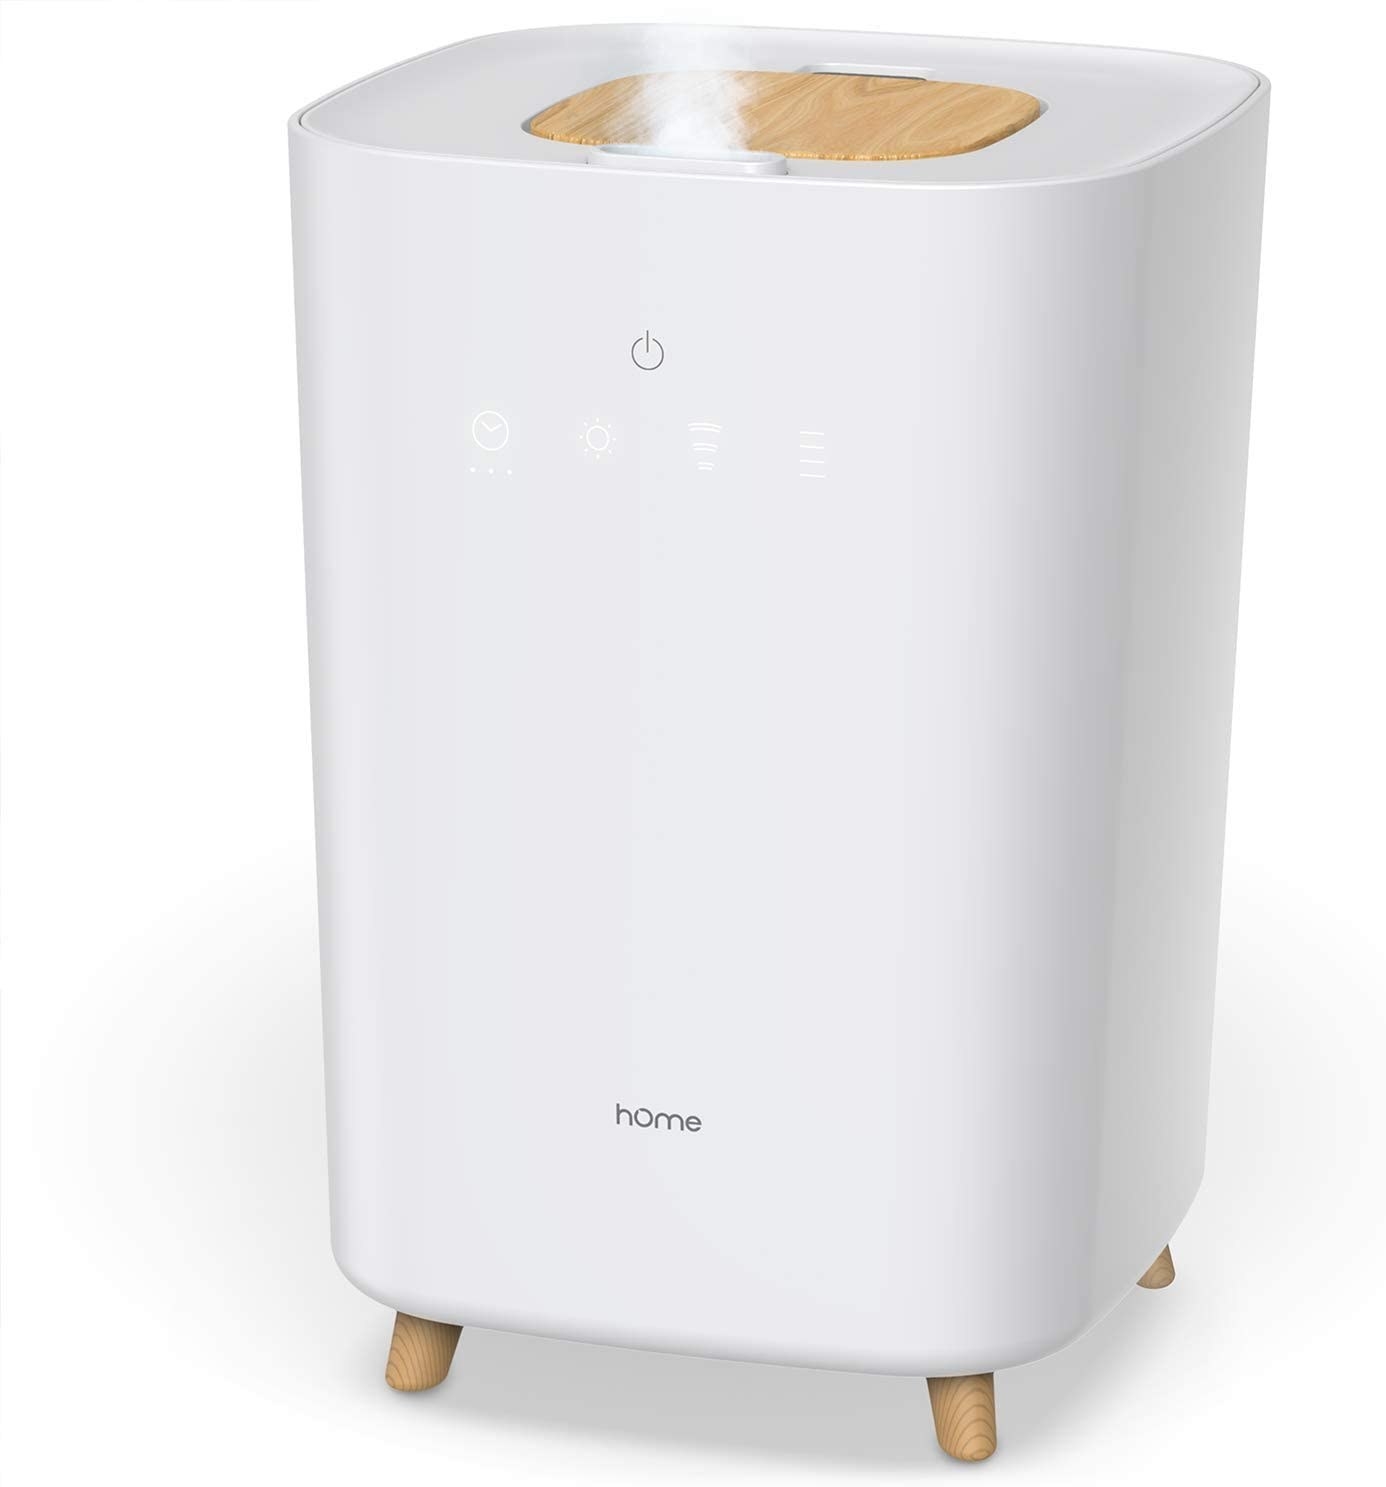 The white humidifier which has four small legs